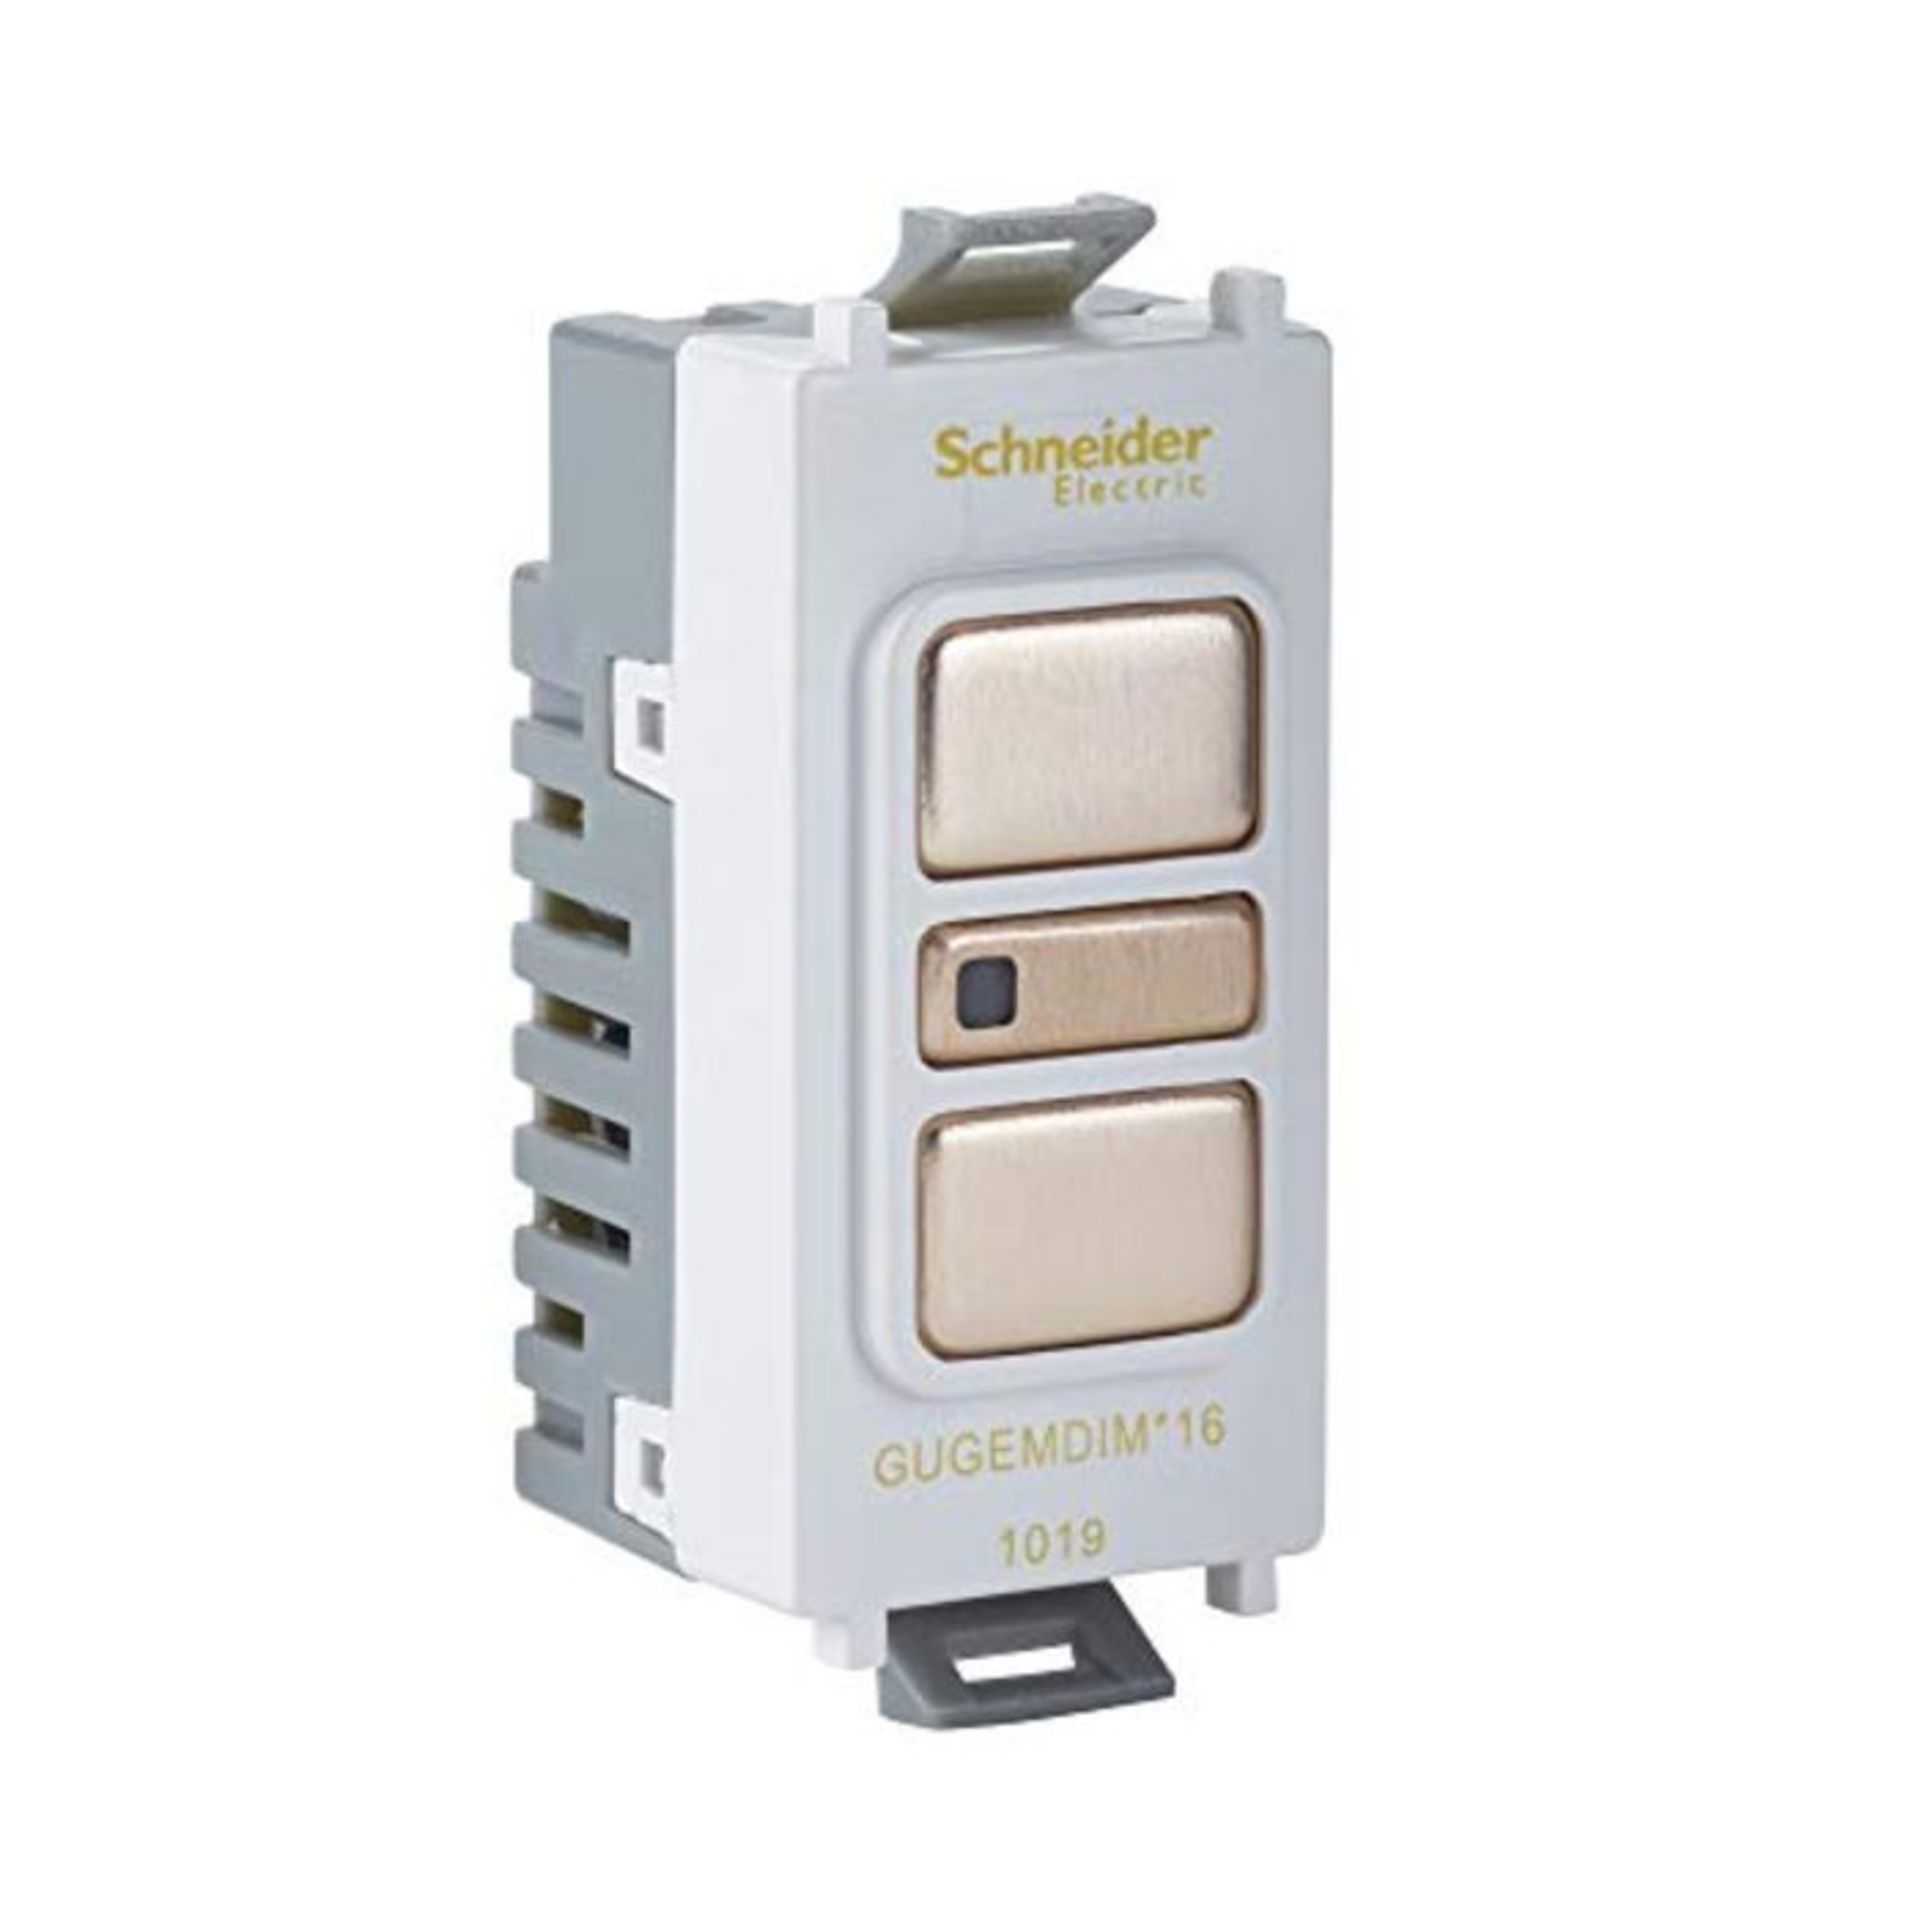 Schneider Electric Ultimate Grid - Retractive 2 Way Touch Dimmer Light Switch, 300VA,